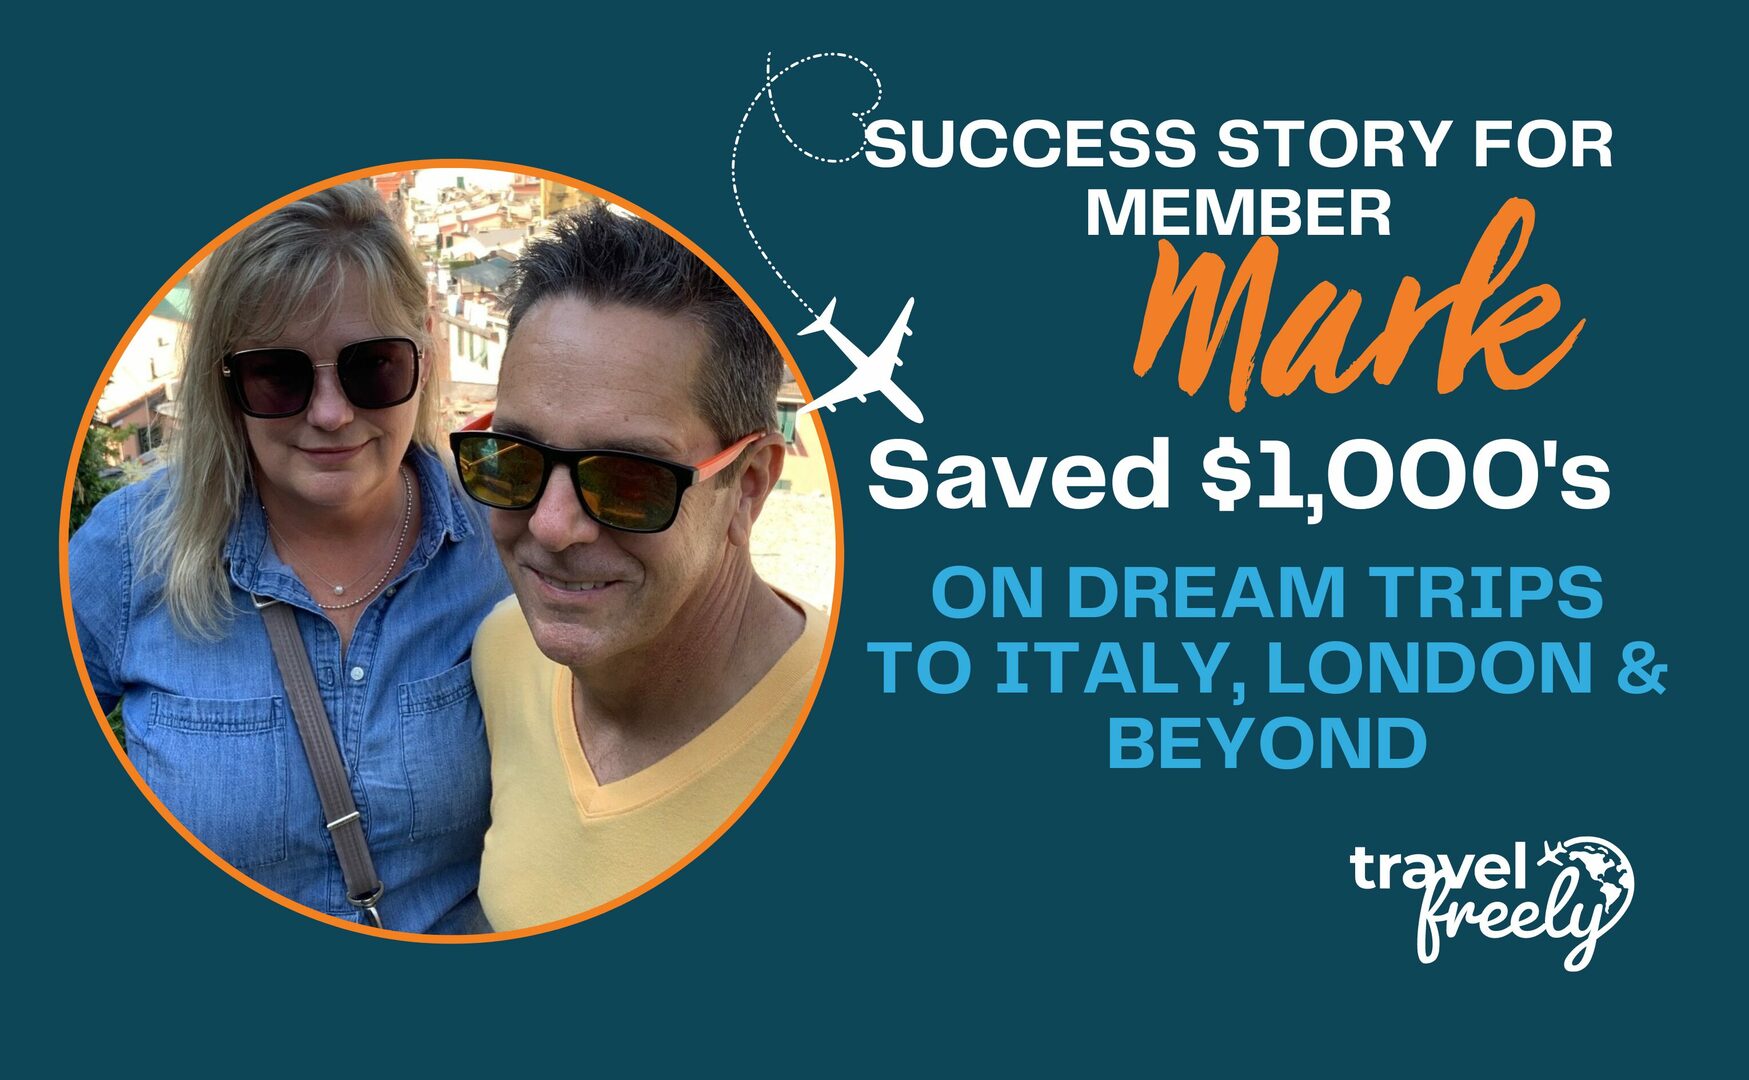 Member Success Story Marks Saves Thousands on Dream Trips to Italy, London & Beyond